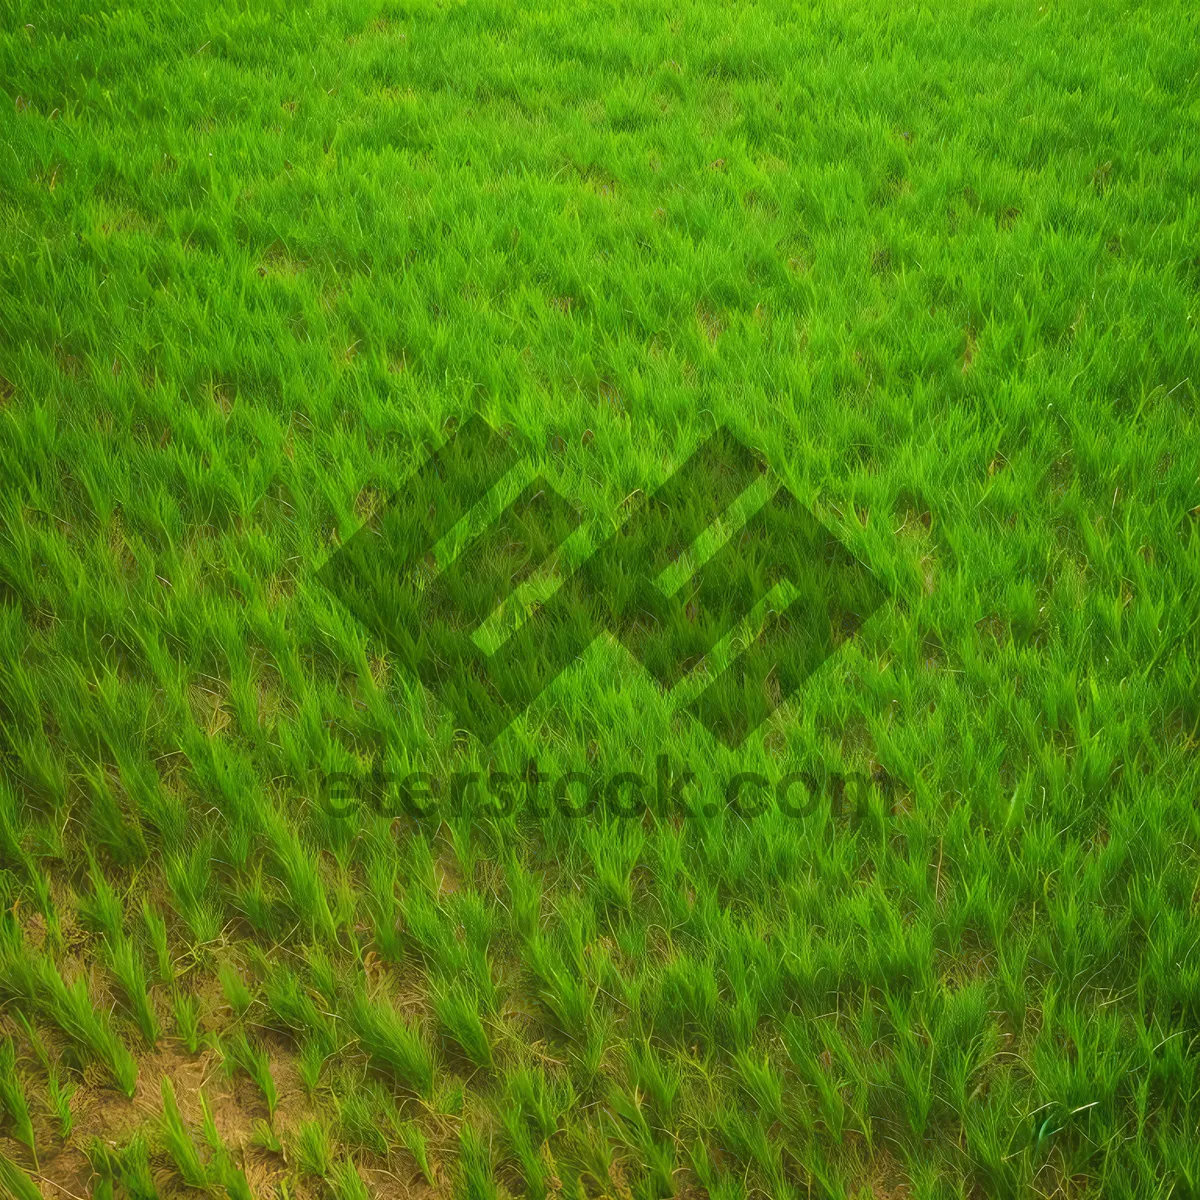 Picture of Vibrant Rice Field Under Sunny Sky